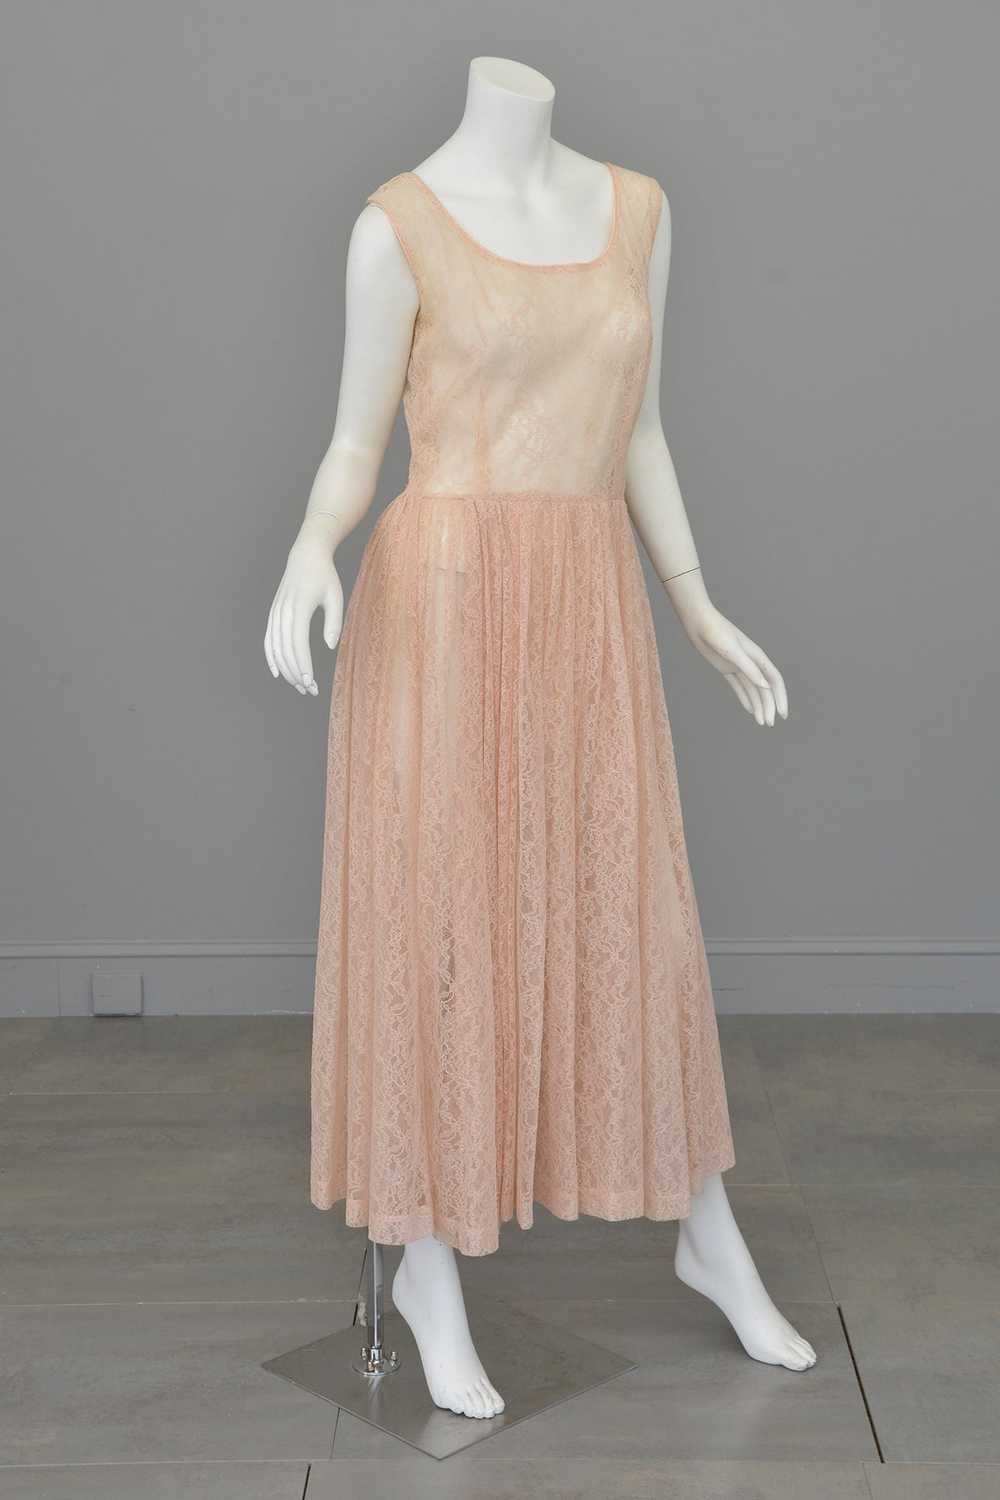 1940s 50s Sheer Light Pink Embroidered Lace Gown - image 4